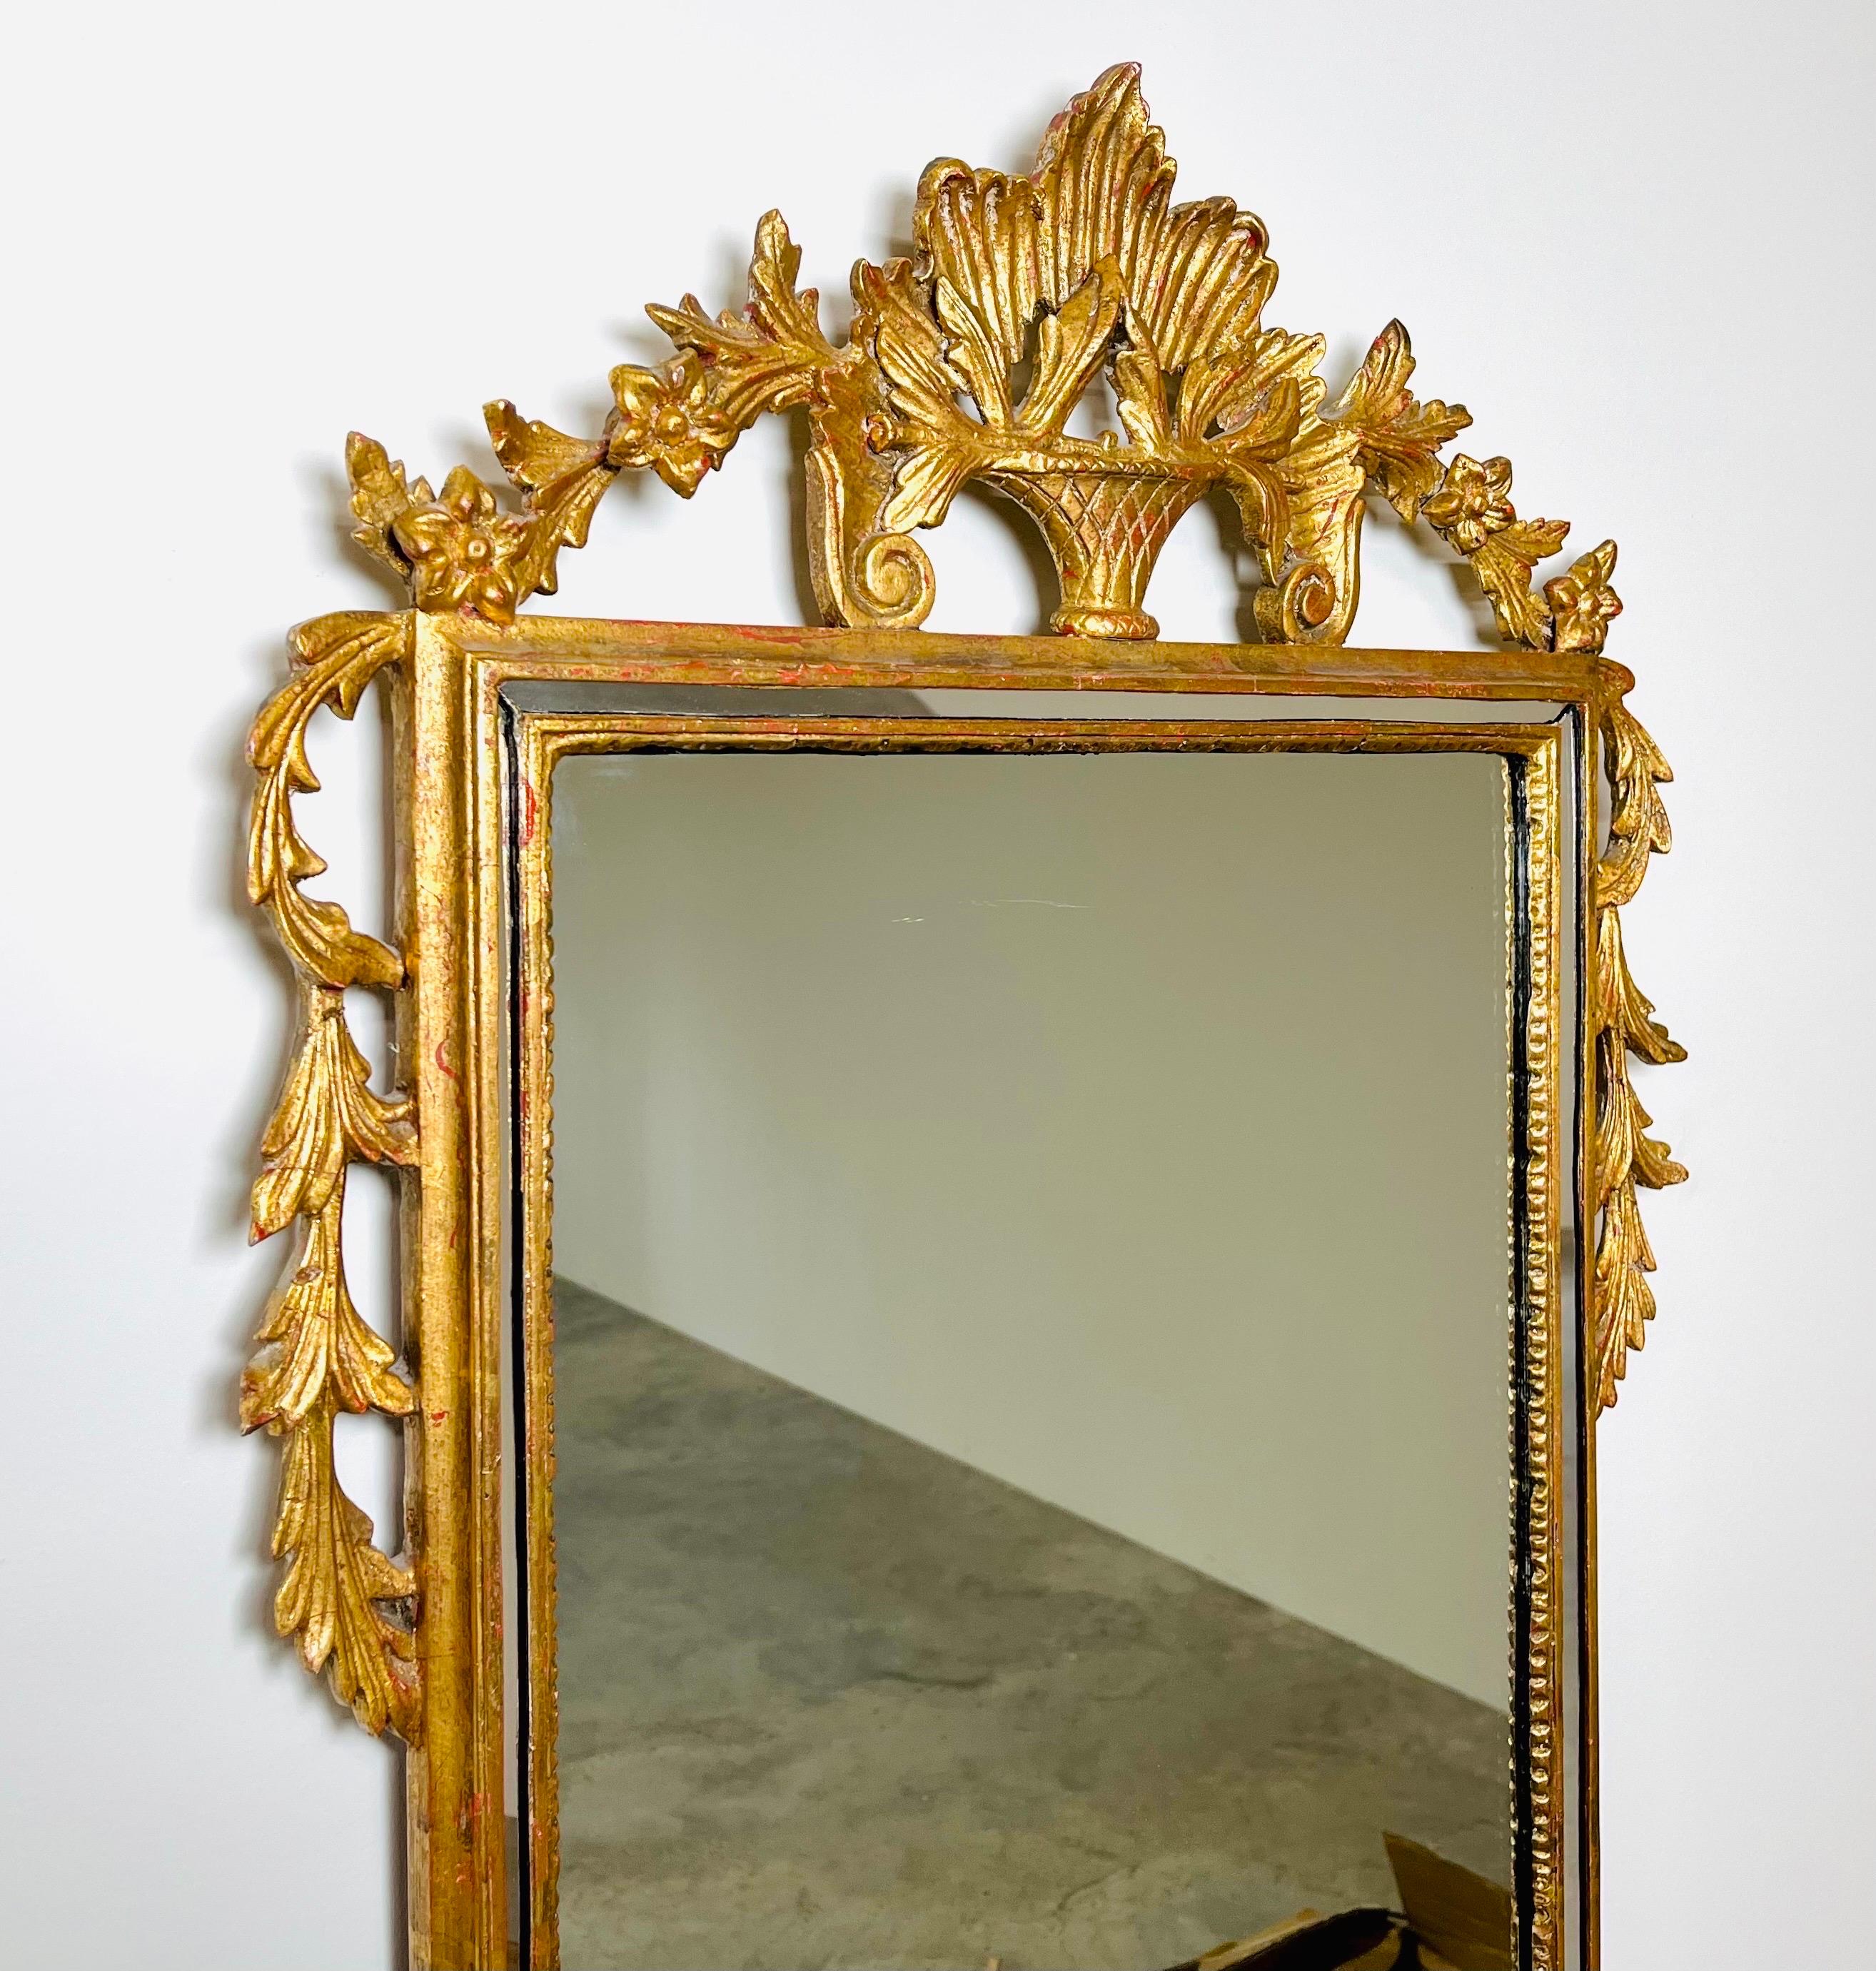 18th century Style wall mirror carvers guild adam with urn and weathered pendants.
 Hand carved details in gilt gold with mirrored border that ads beautiful depth. In great condition. 
This mirror originally hung in the lobby of the prestigious